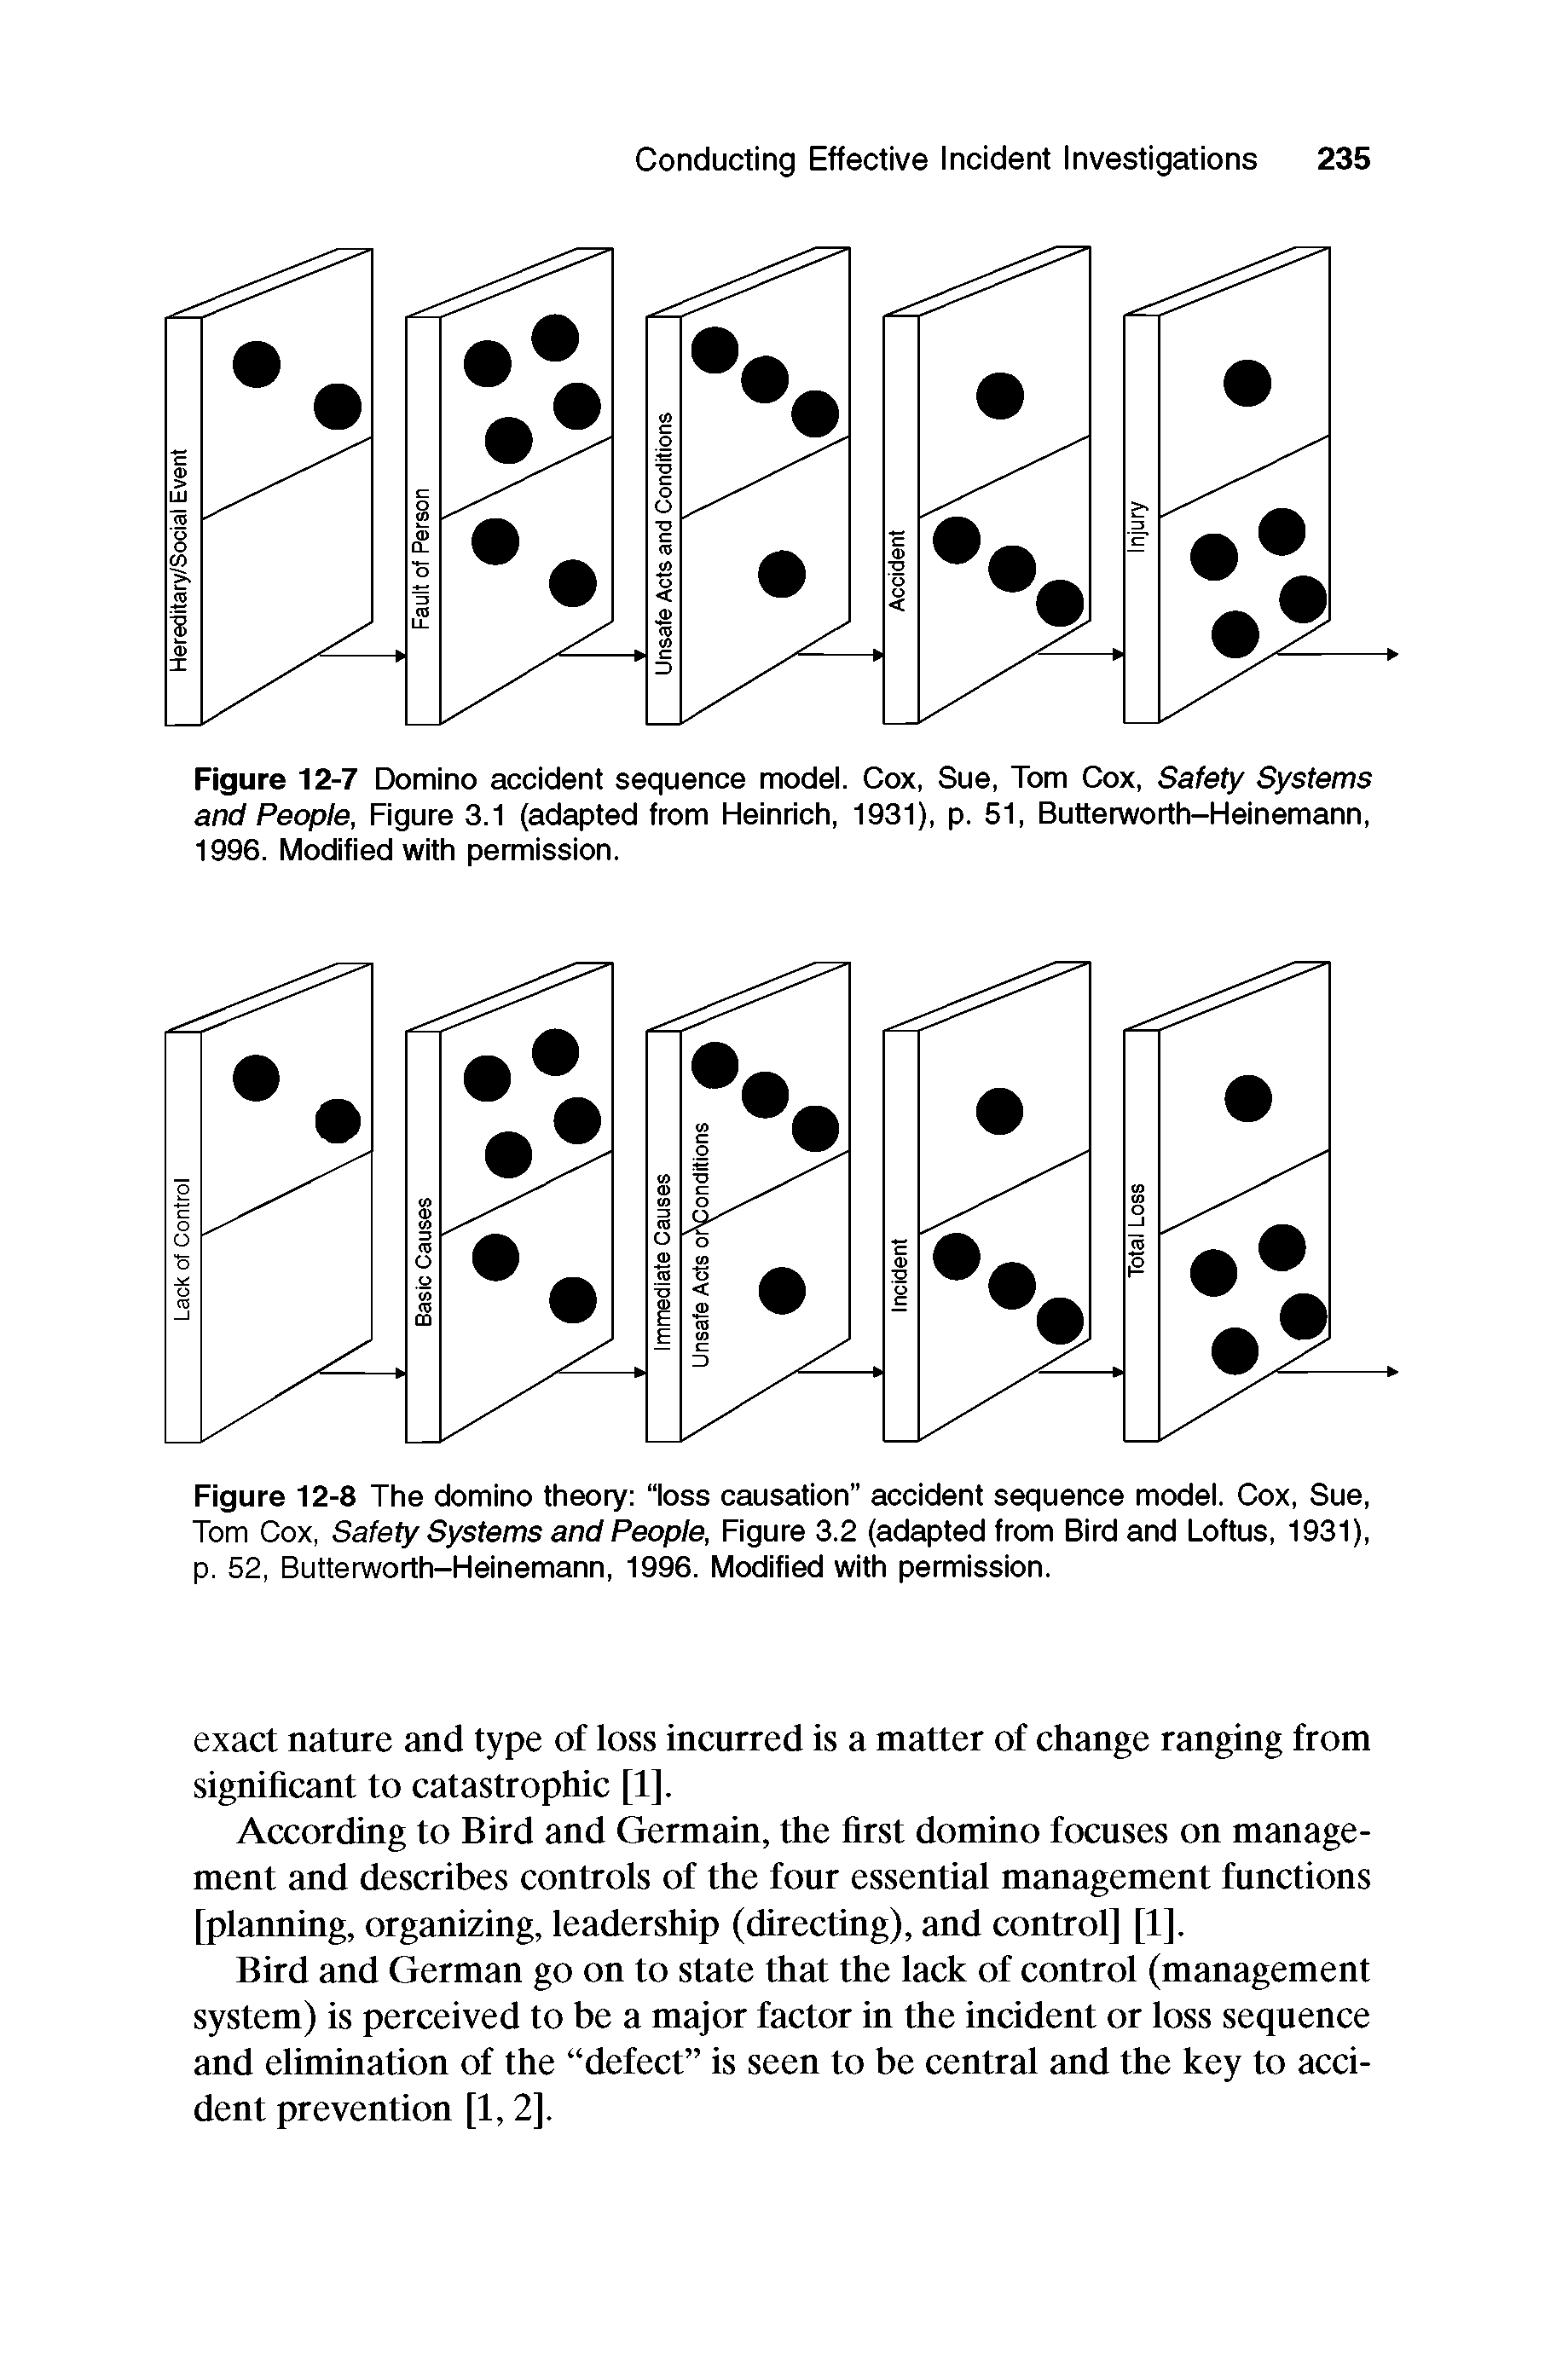 Figure 12-8 The domino theory loss causation accident sequence model. Cox. Sue. Tom Cox, Safety Systems and People, Figure 3.2 (adapted from Bird and Loftus, 1931), p. 52, Butterworth-Heinemann, 1996. Modified with permission.